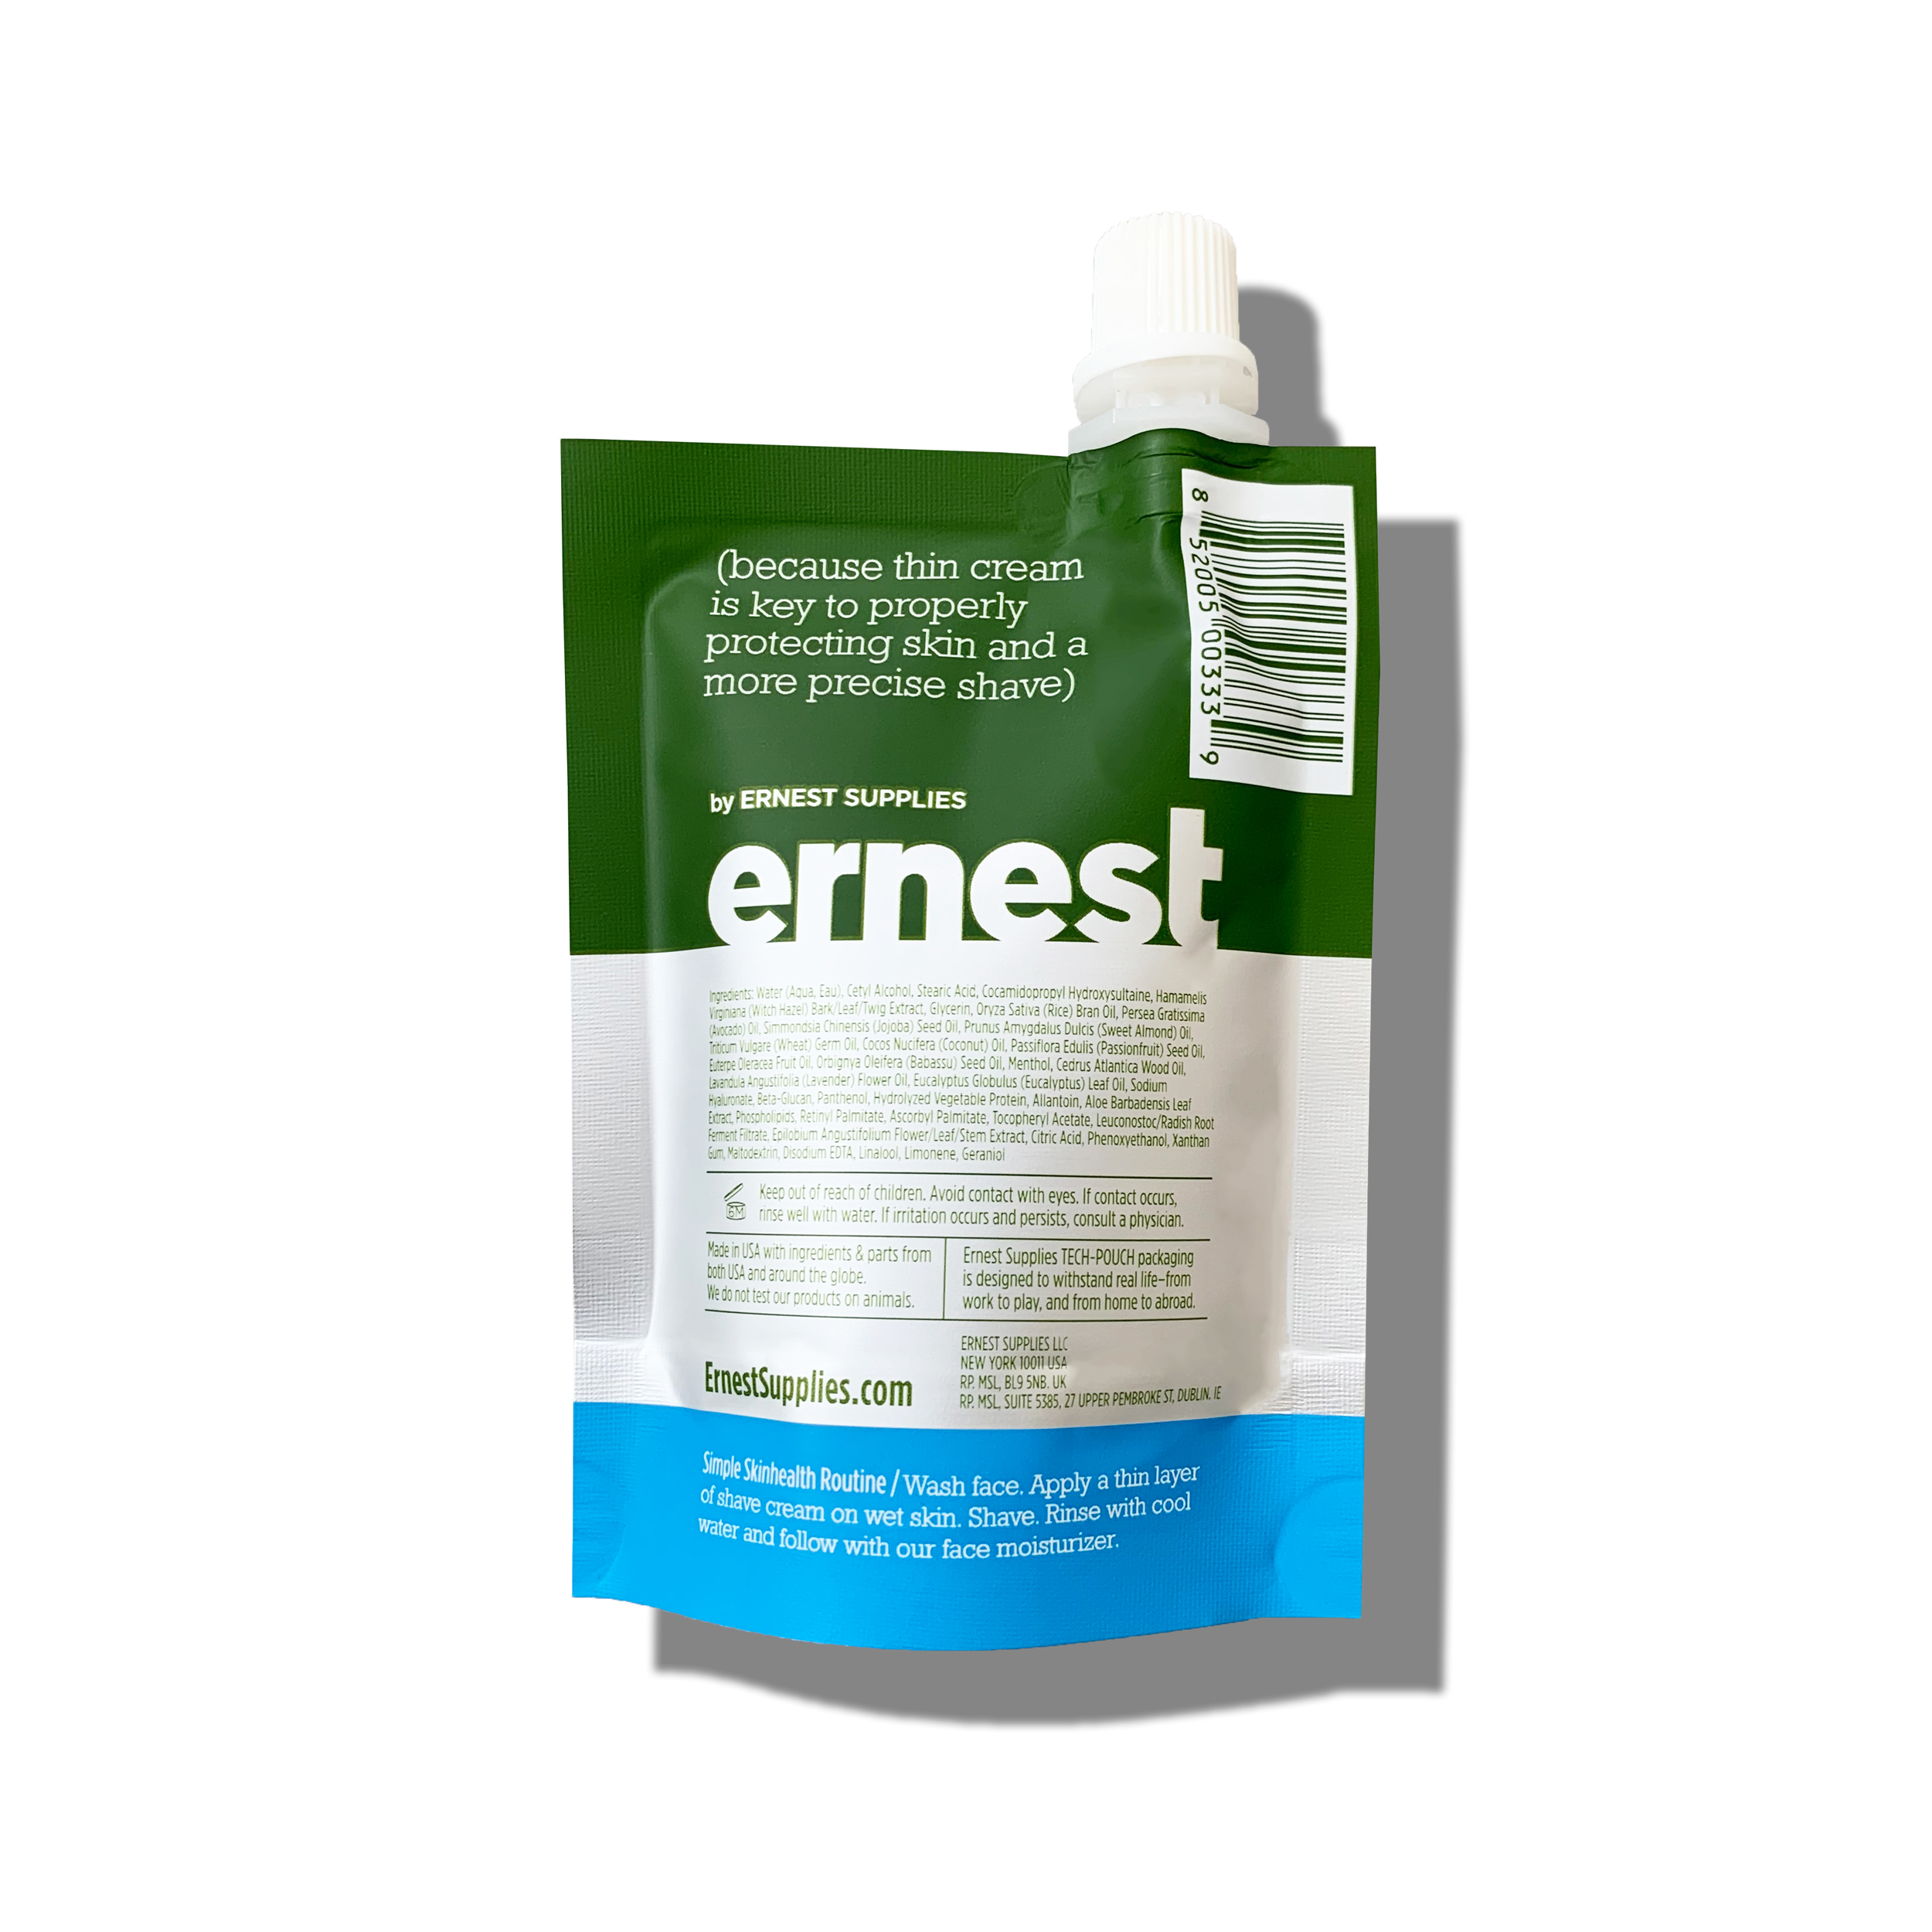 ernest by Ernest Supplies Soothing Shave Cream: 3-in-1 Pre-Shave, Shave Cream, and After Shave, 3 Oz - image 2 of 5